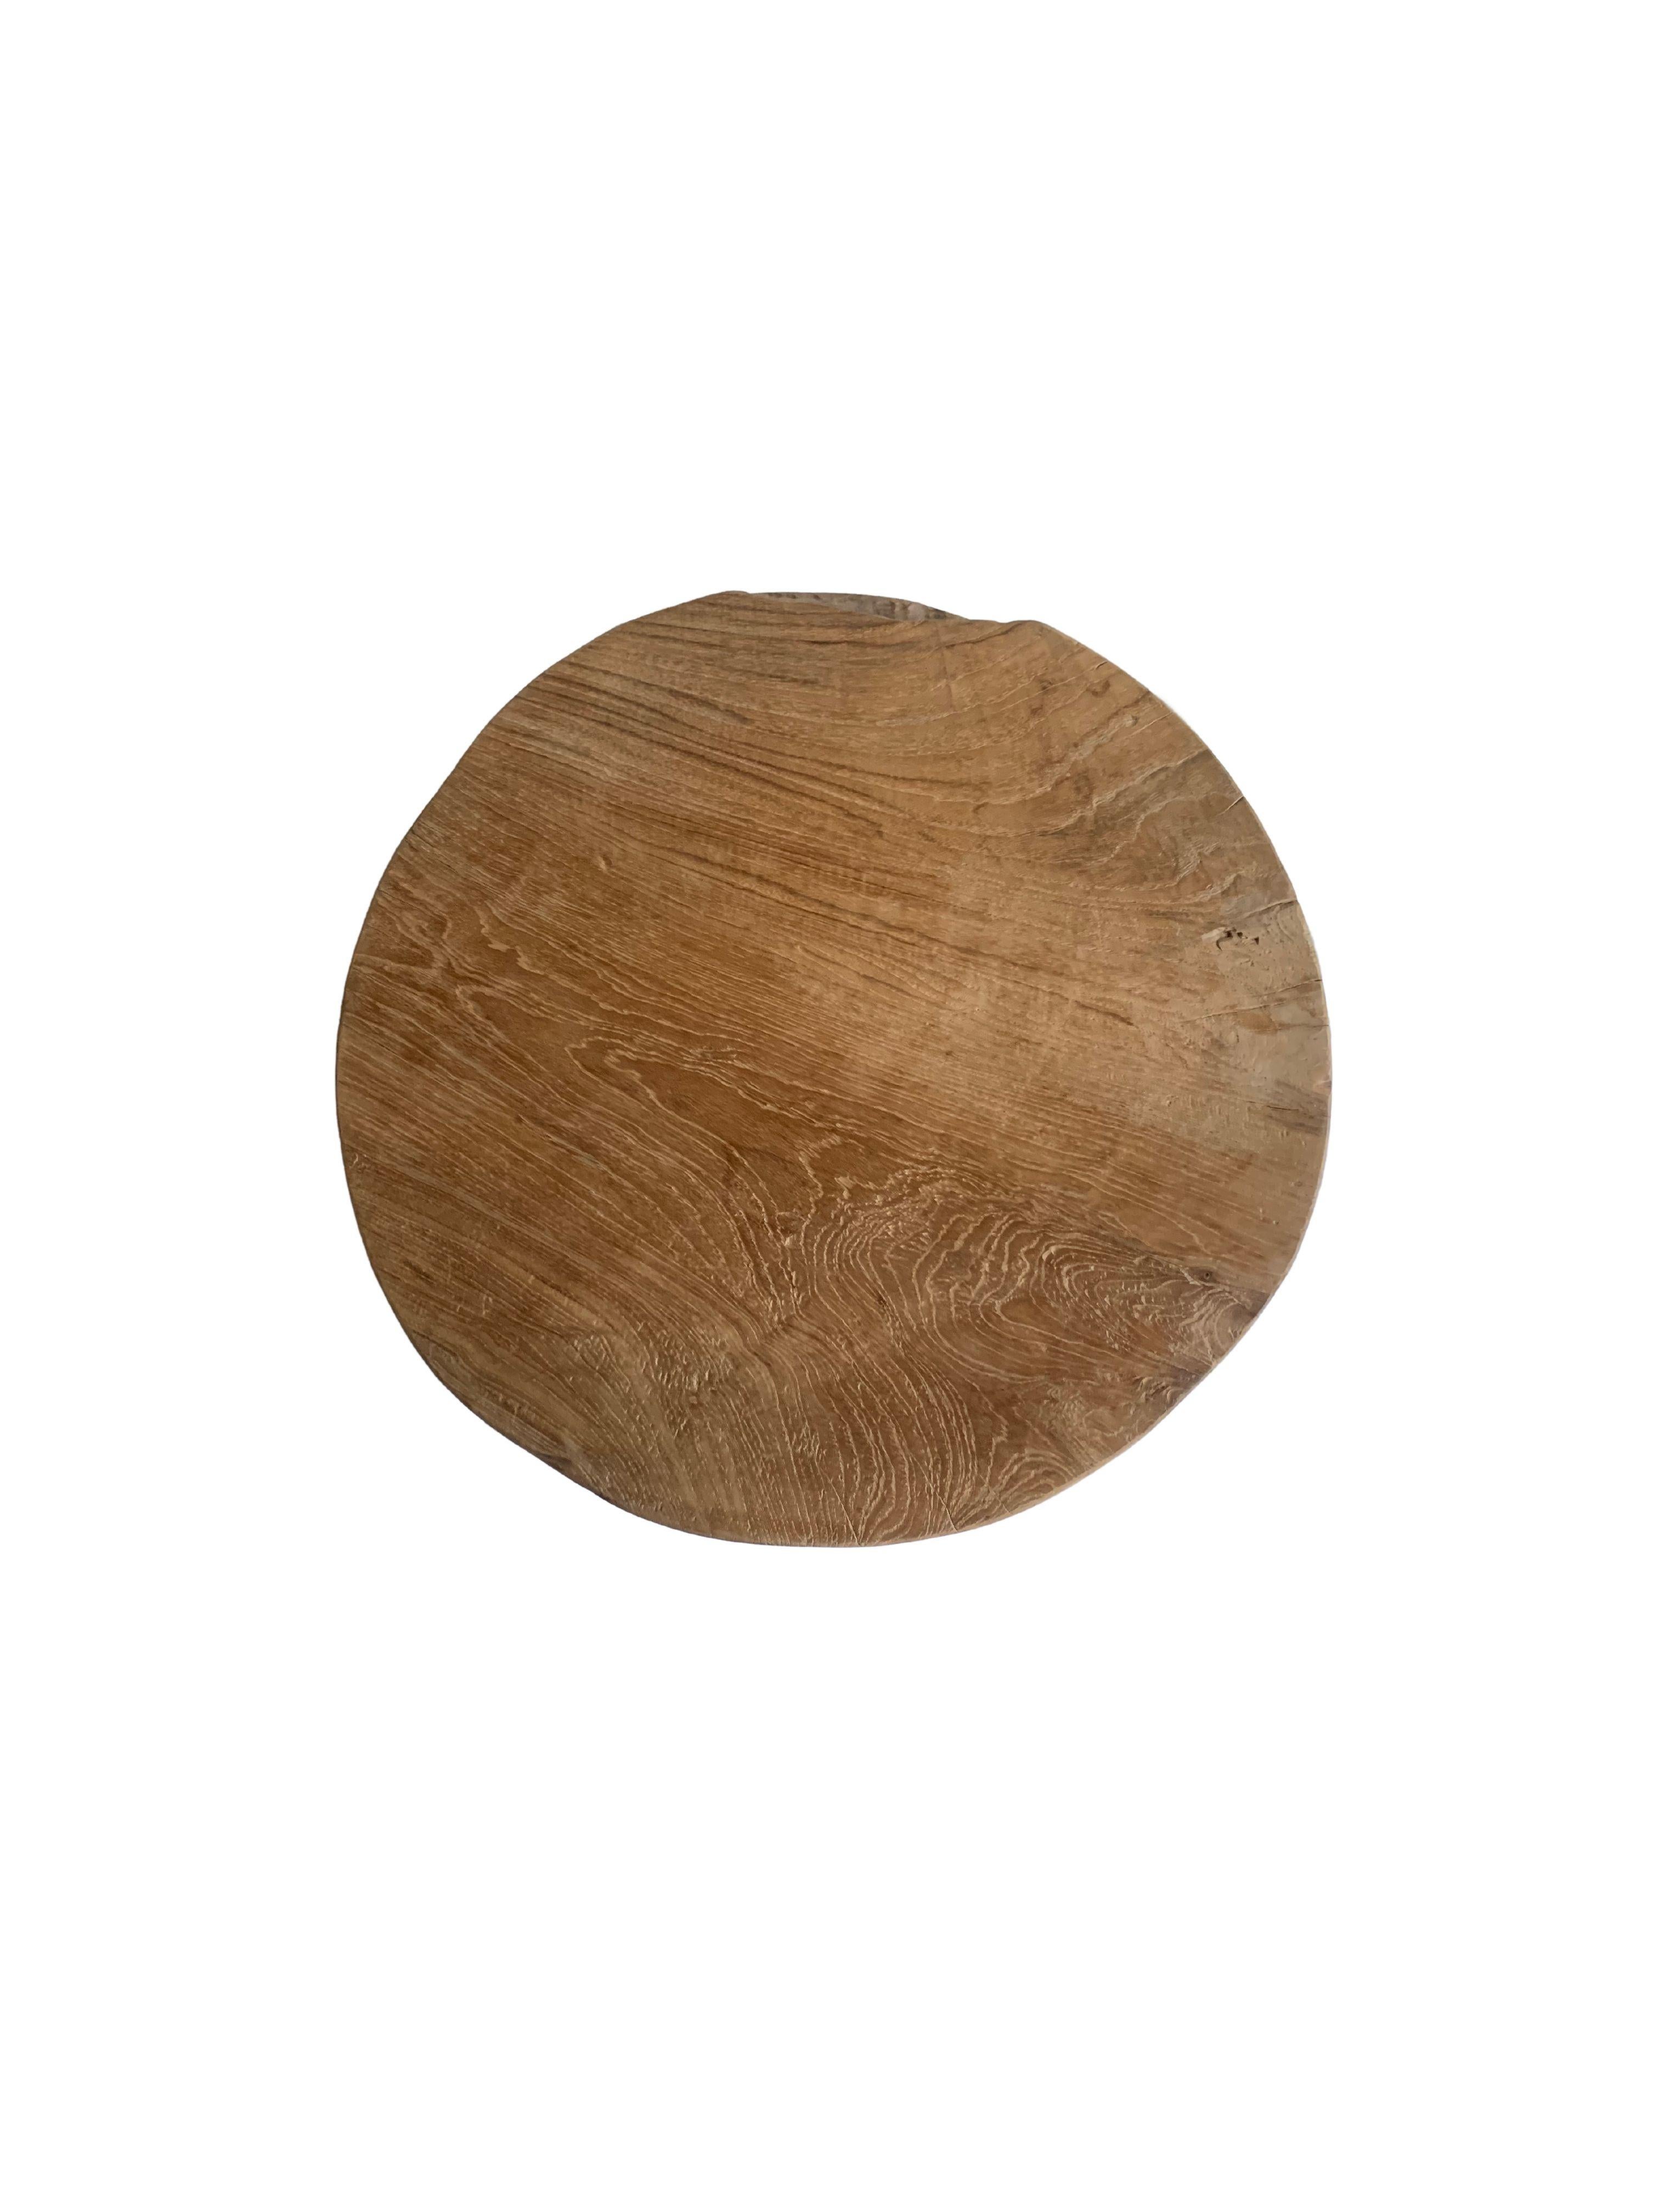 Hand-Crafted Sculptural Side Table Crafted from Round Solid Teak Wood Slabs